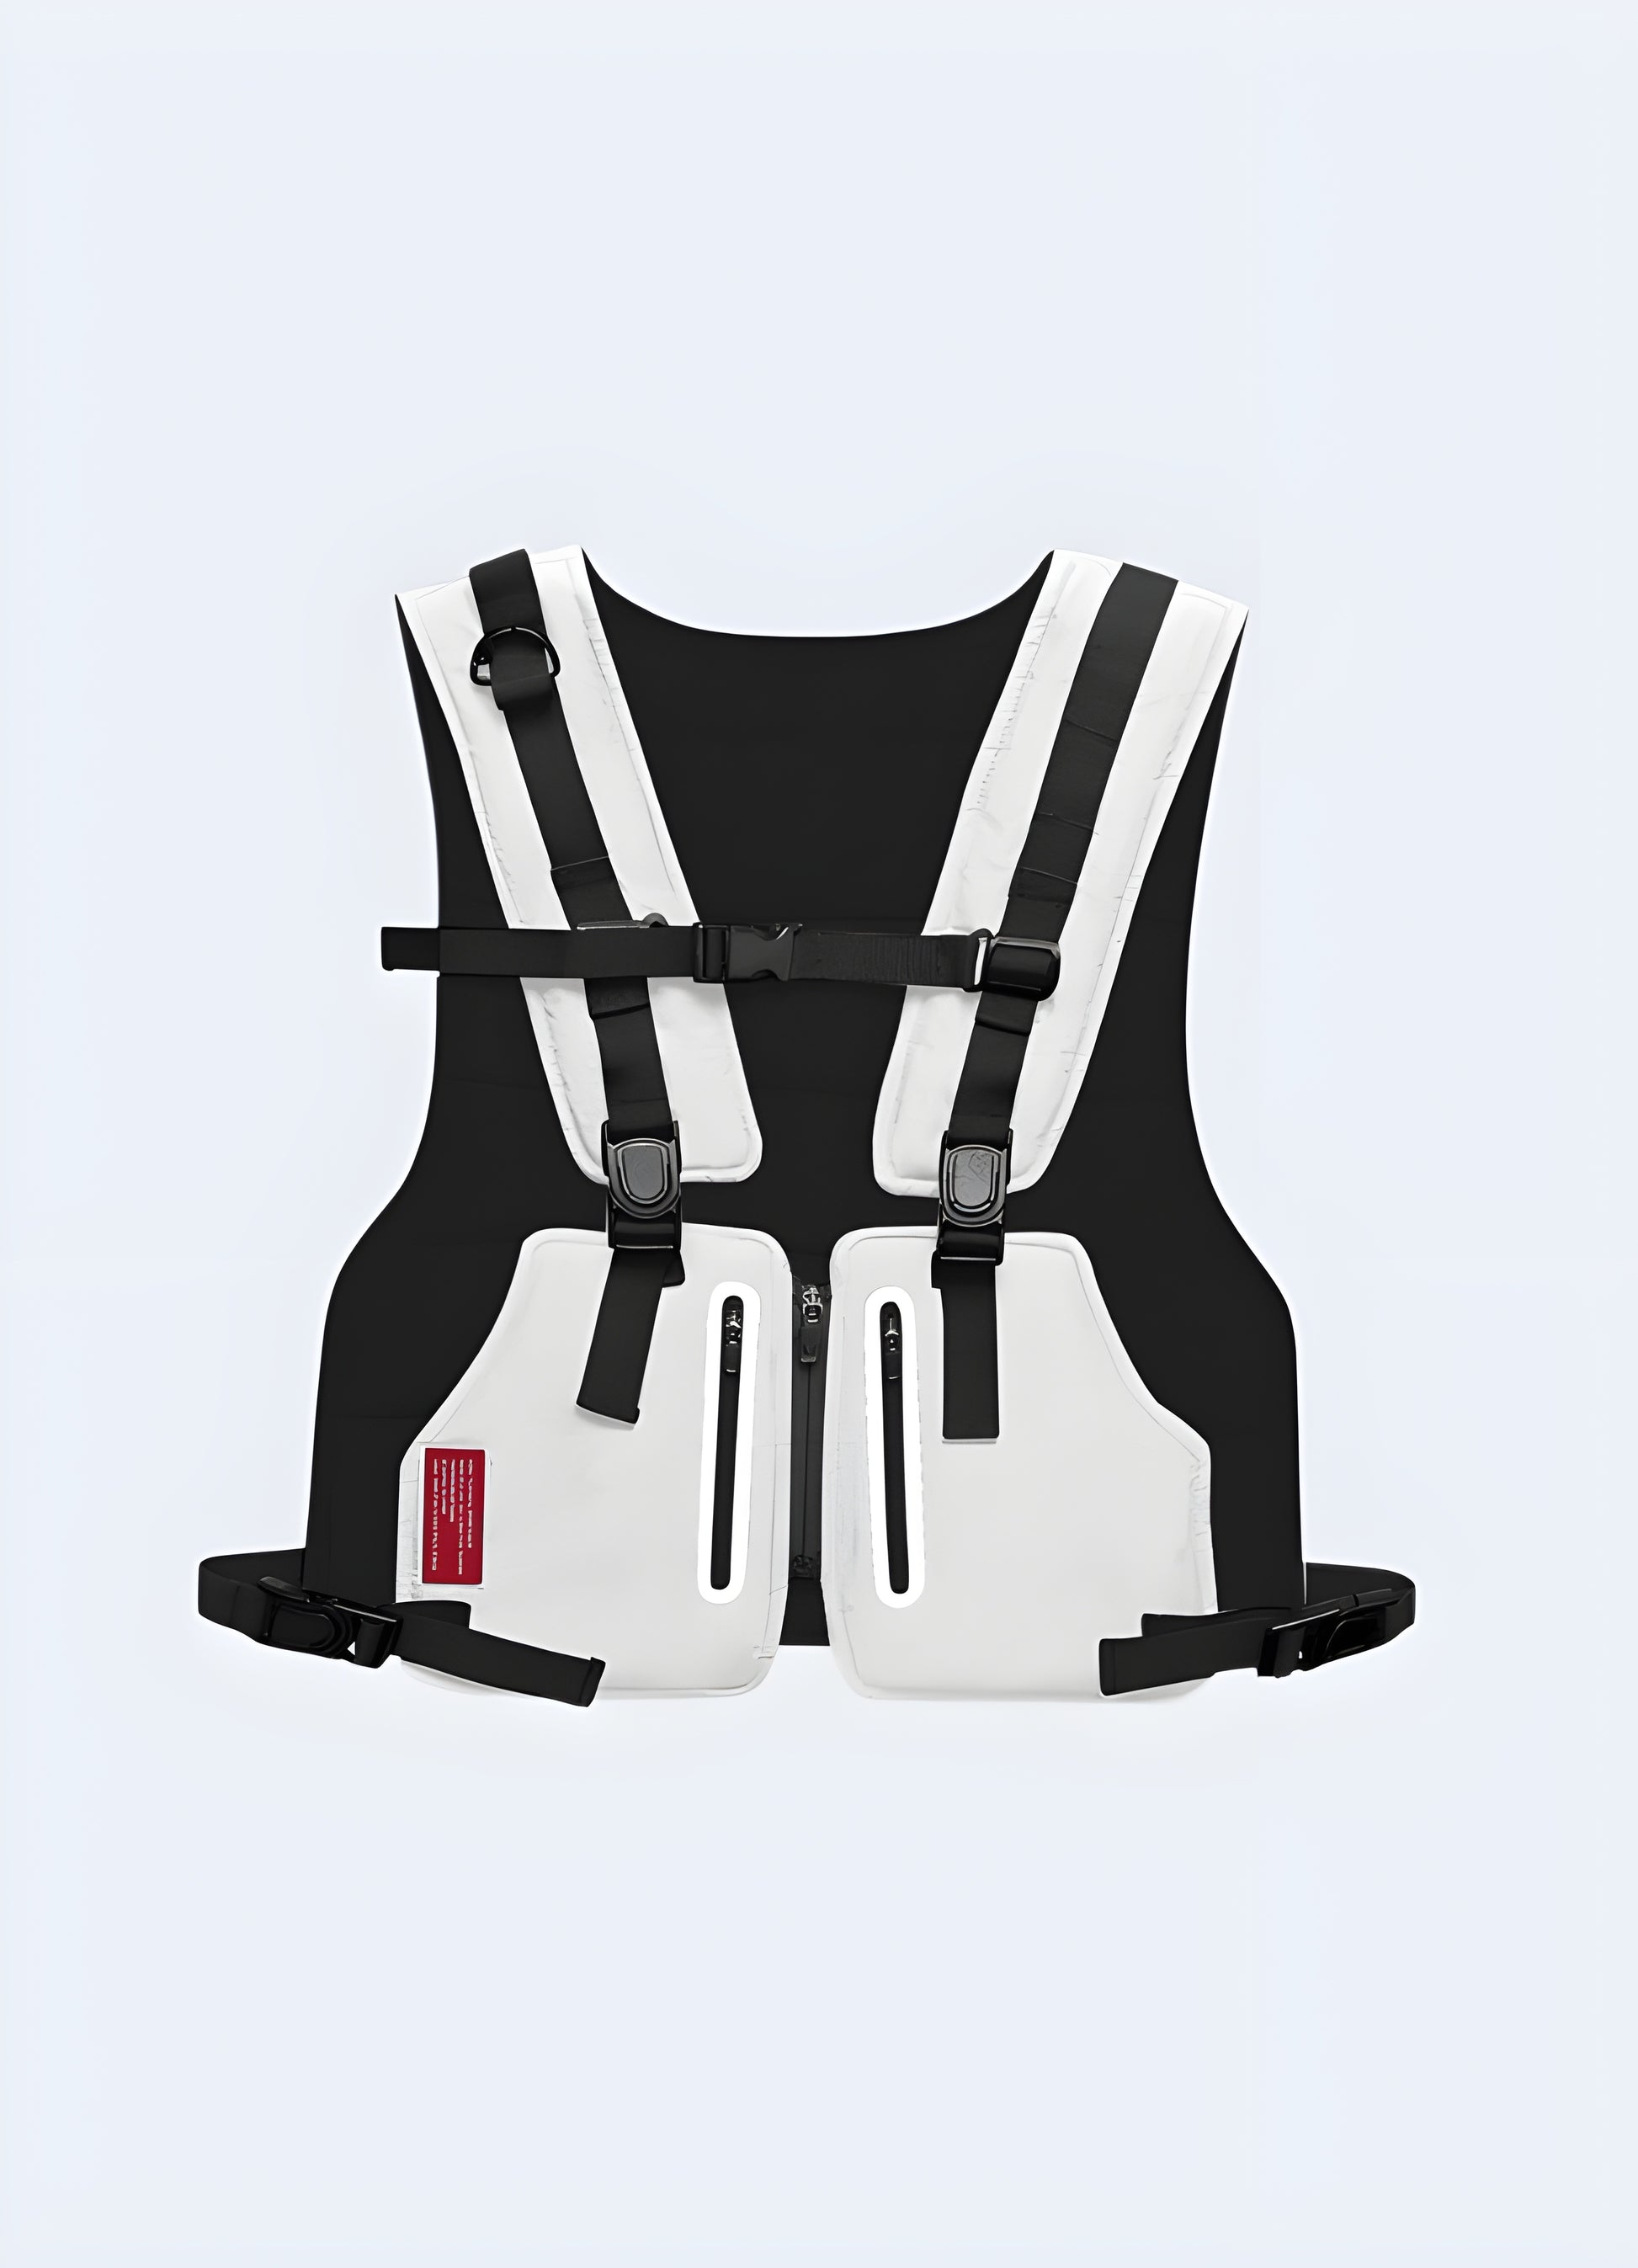 With our sleek and stylish tactical chest rig, you wear a manifestation of the future.